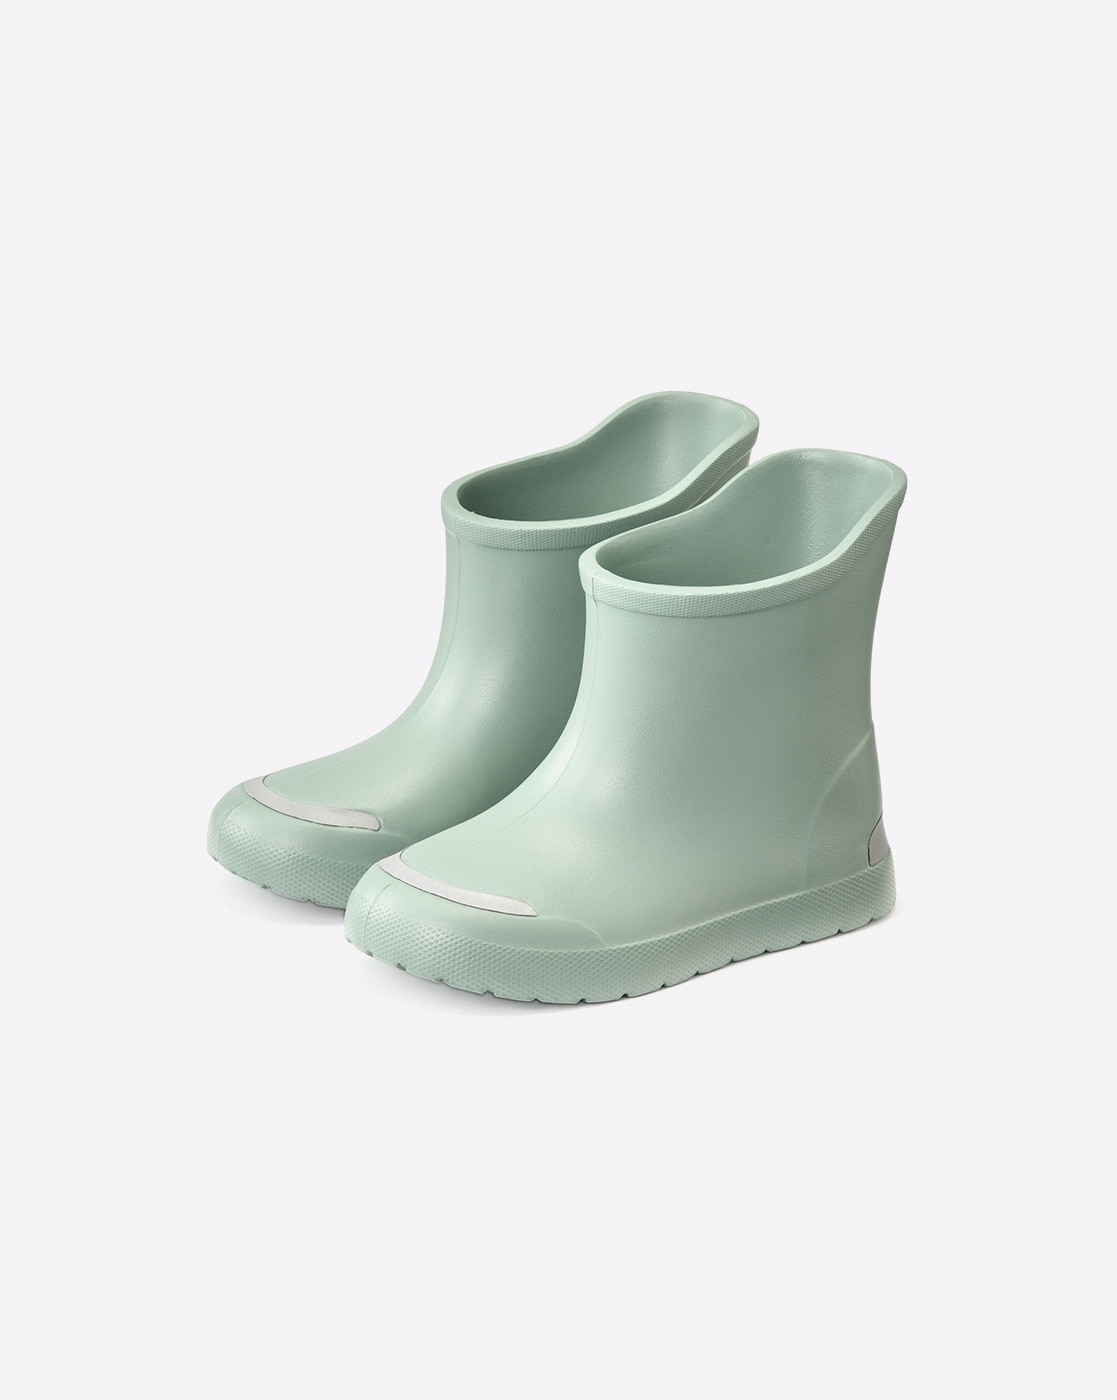 Sage Green Shoes for Infants by MUJI 